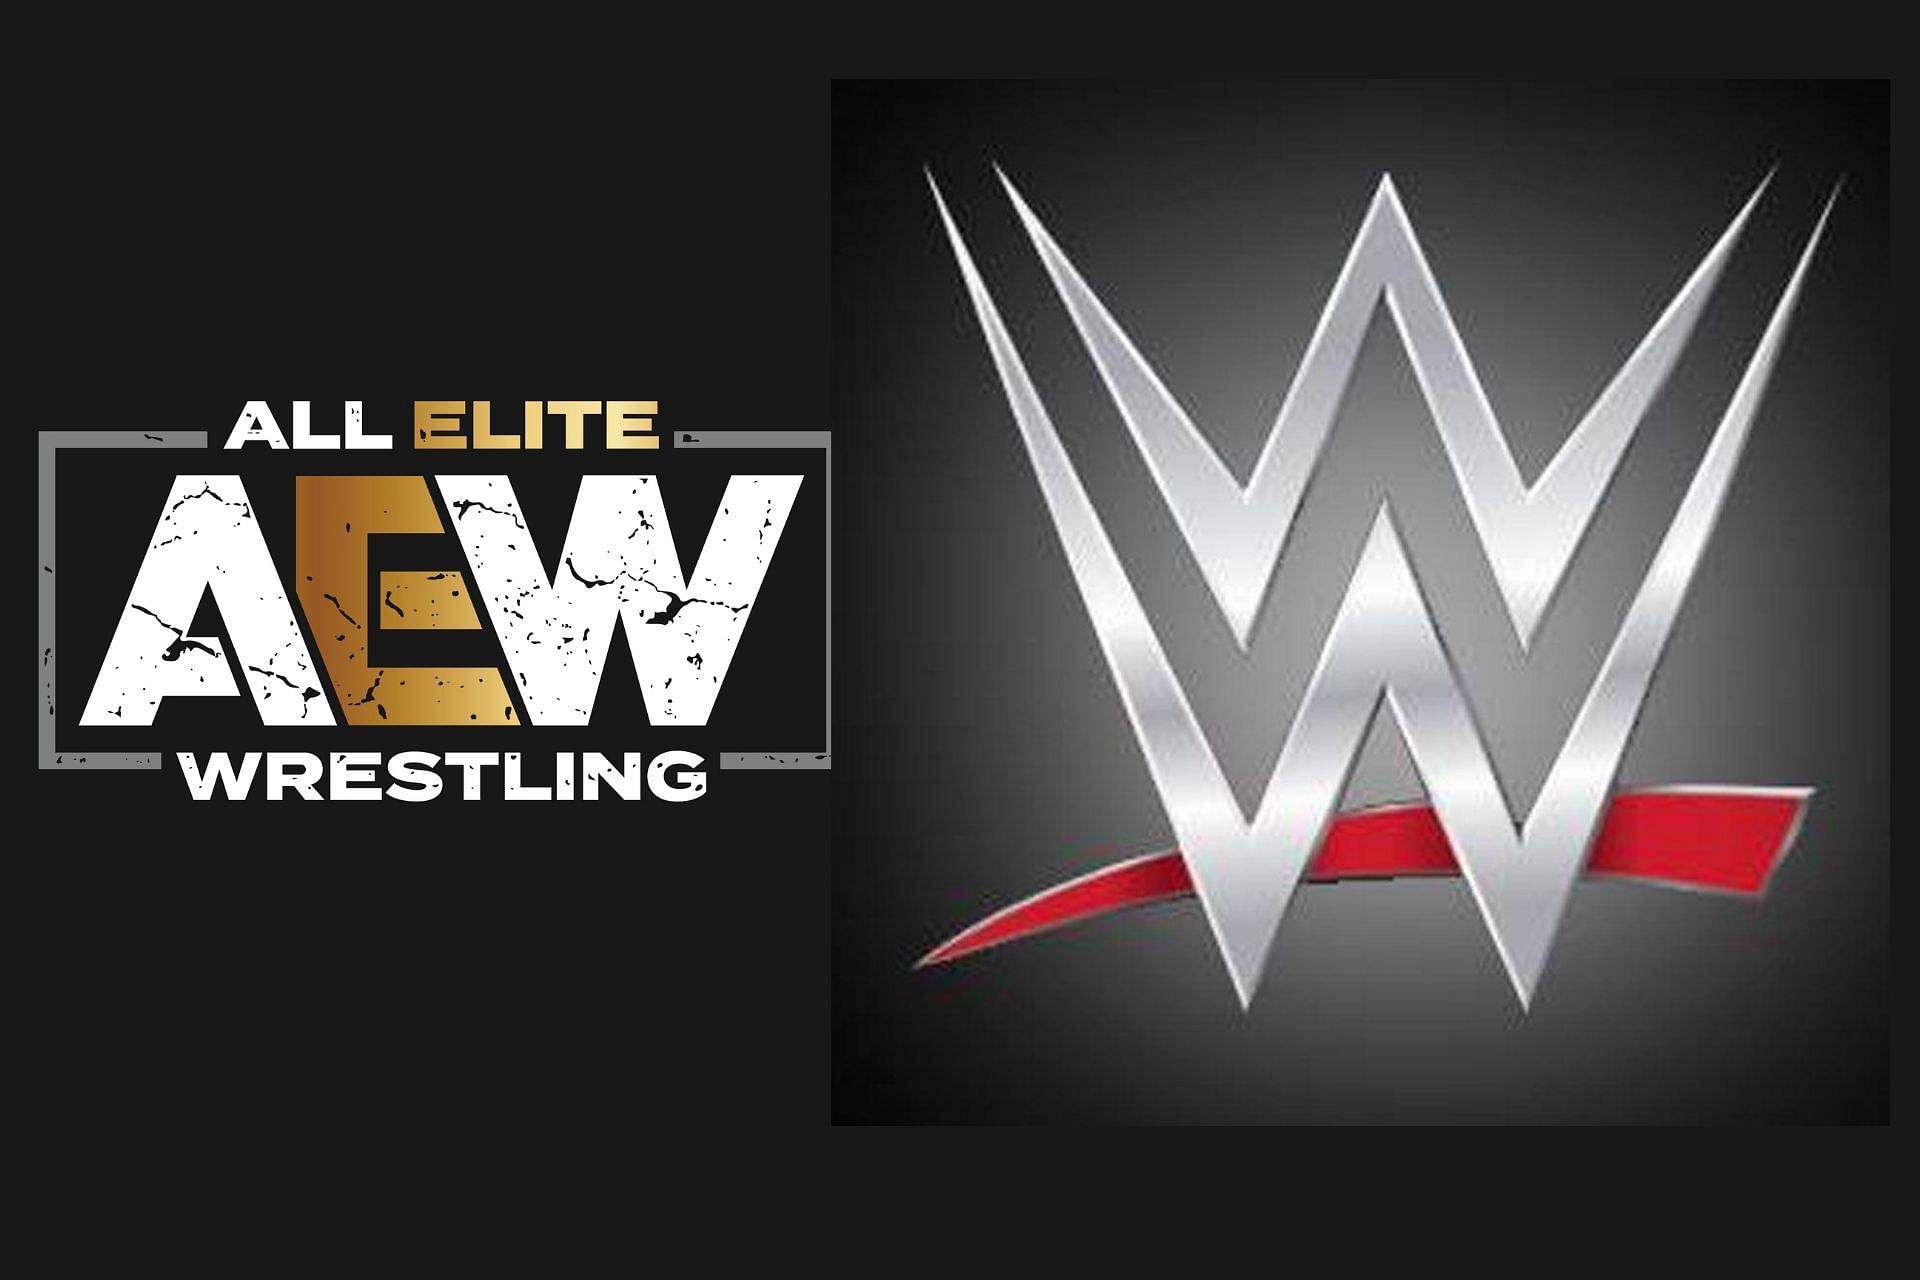 A former WWE wrestler is now on the AEW roster